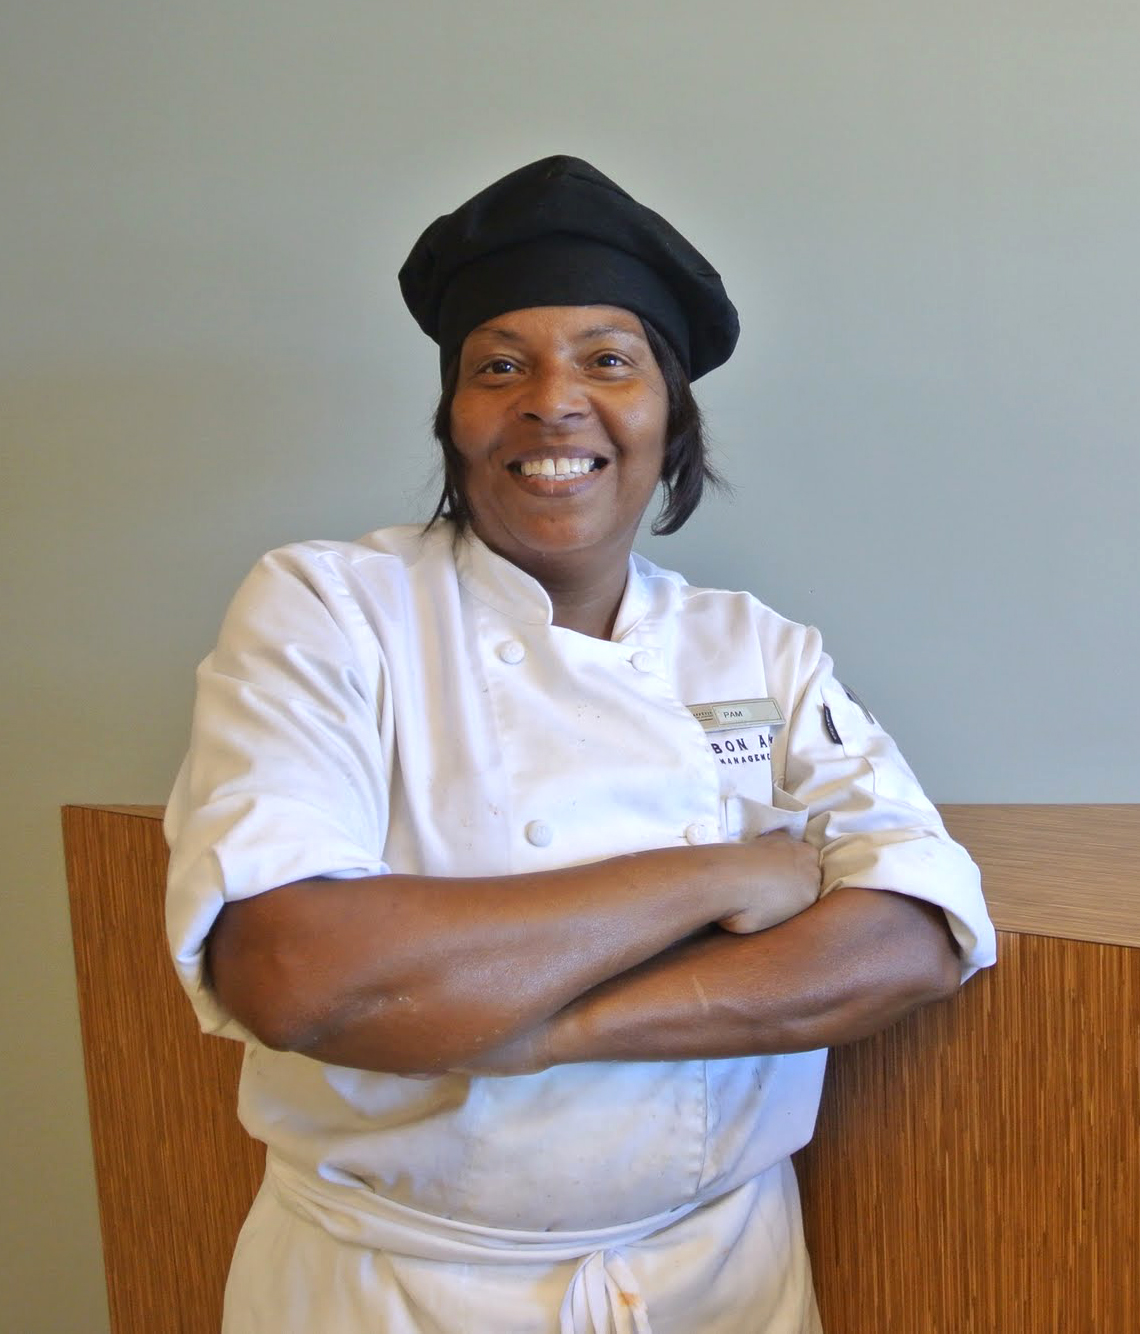 Pam Flowers, Deli Cook at Savannah College of Art and Design